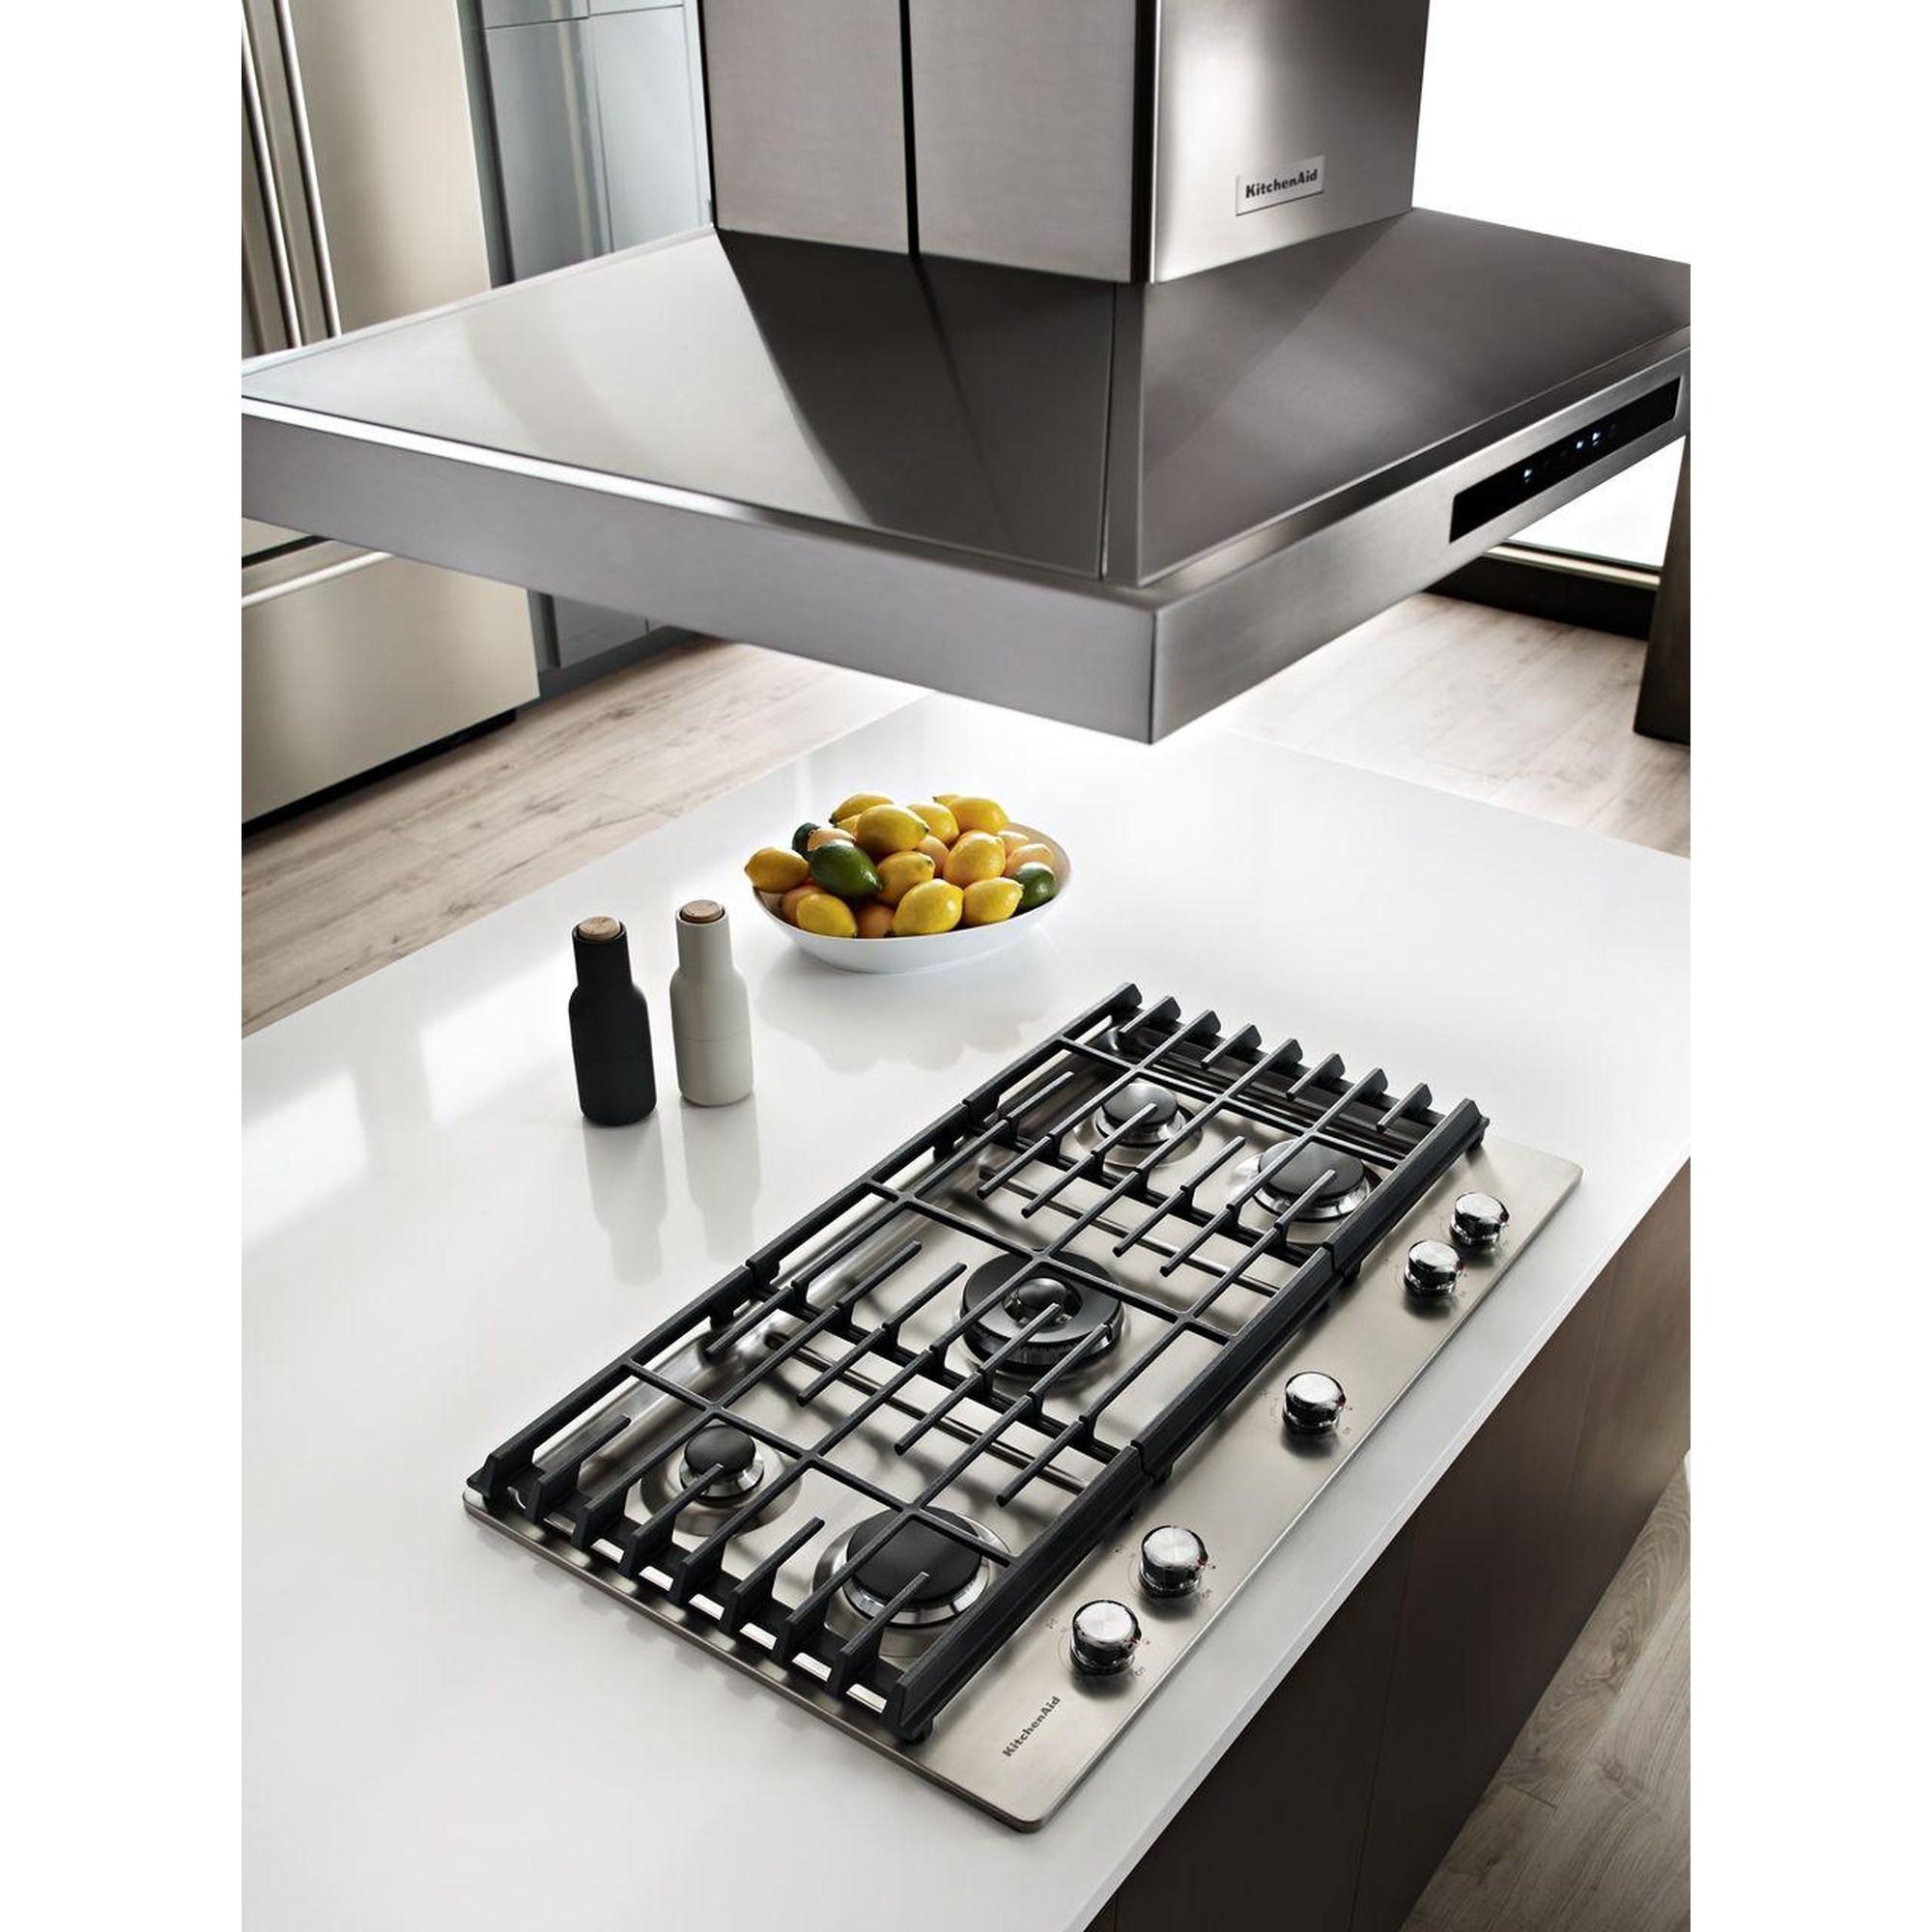 KCGS950ESS KitchenAid 30'' 5-Burner Gas Cooktop with Griddle & Dual Ring  Burner - Stainless Steel